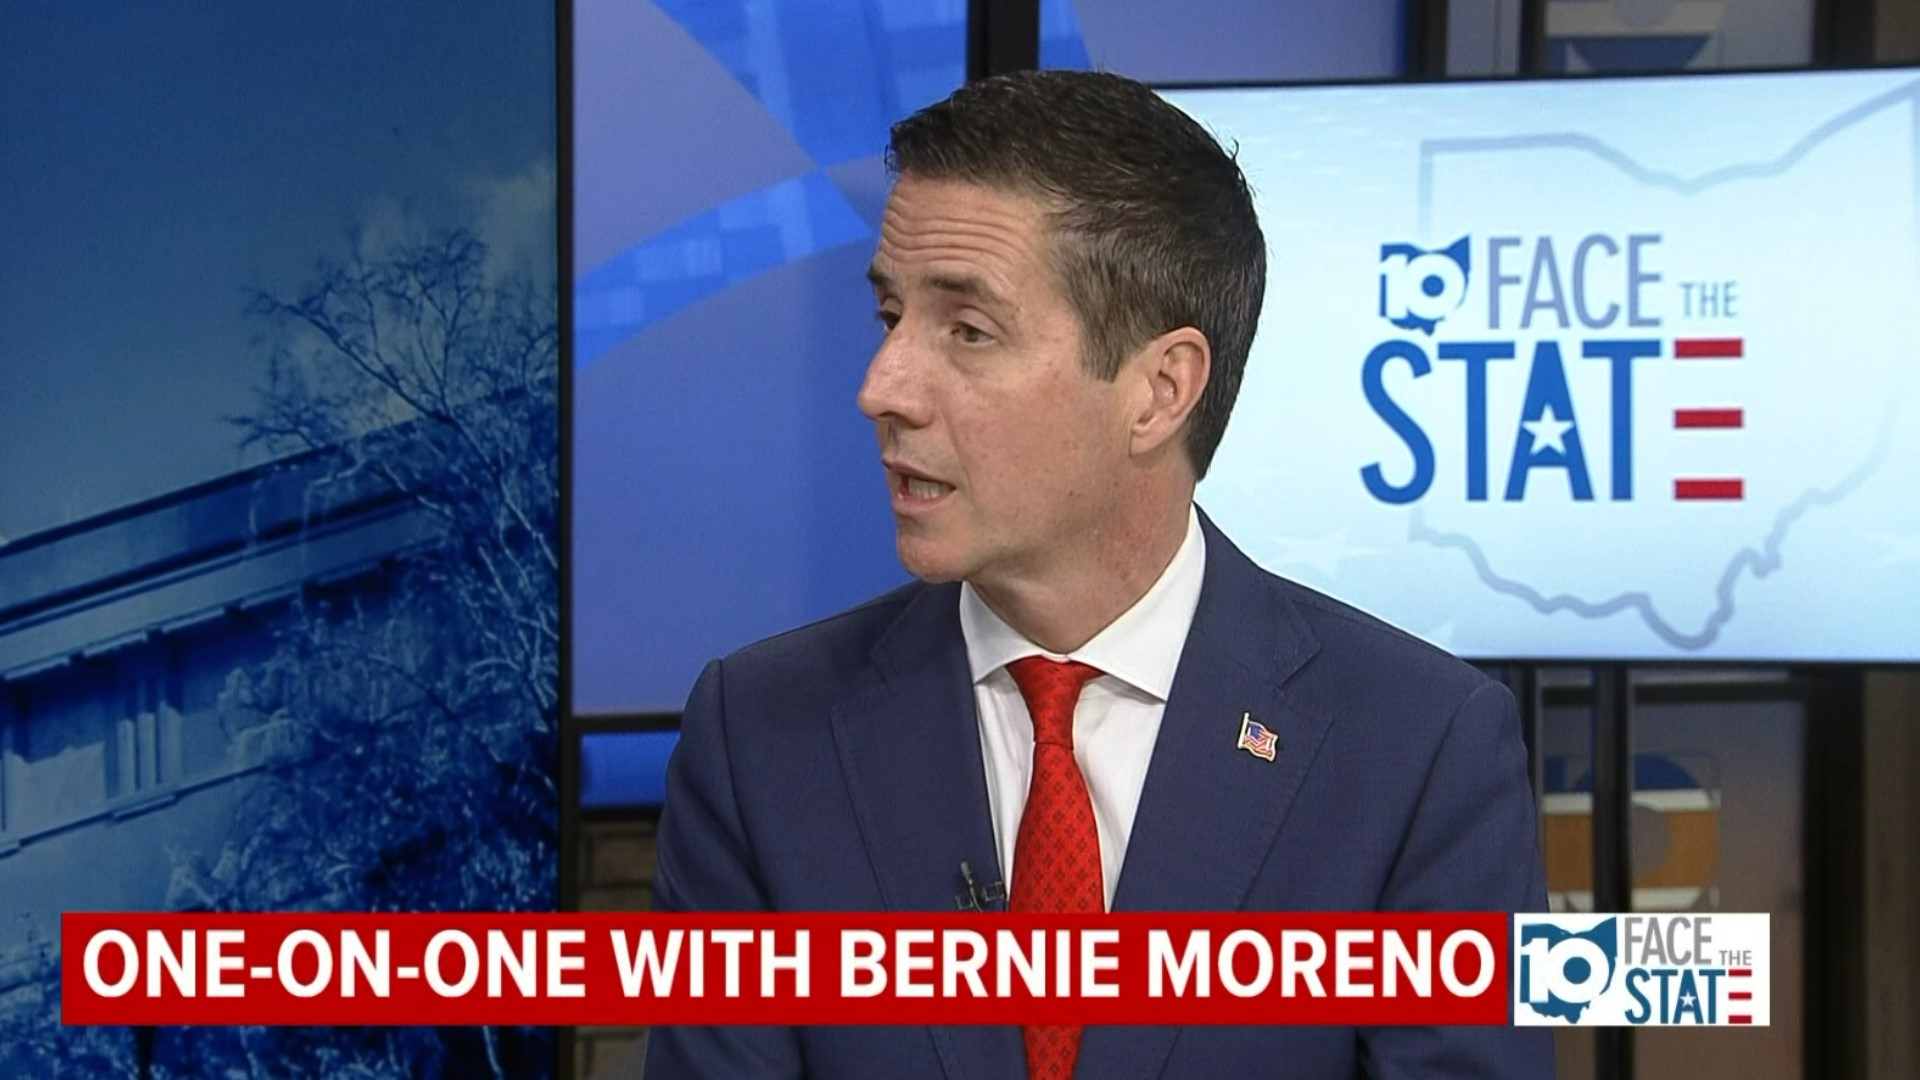 On this week's Face the State, we have a discussion with Republican nominee Bernie Moreno about the border, abortion, the Russia-Ukraine war and more.